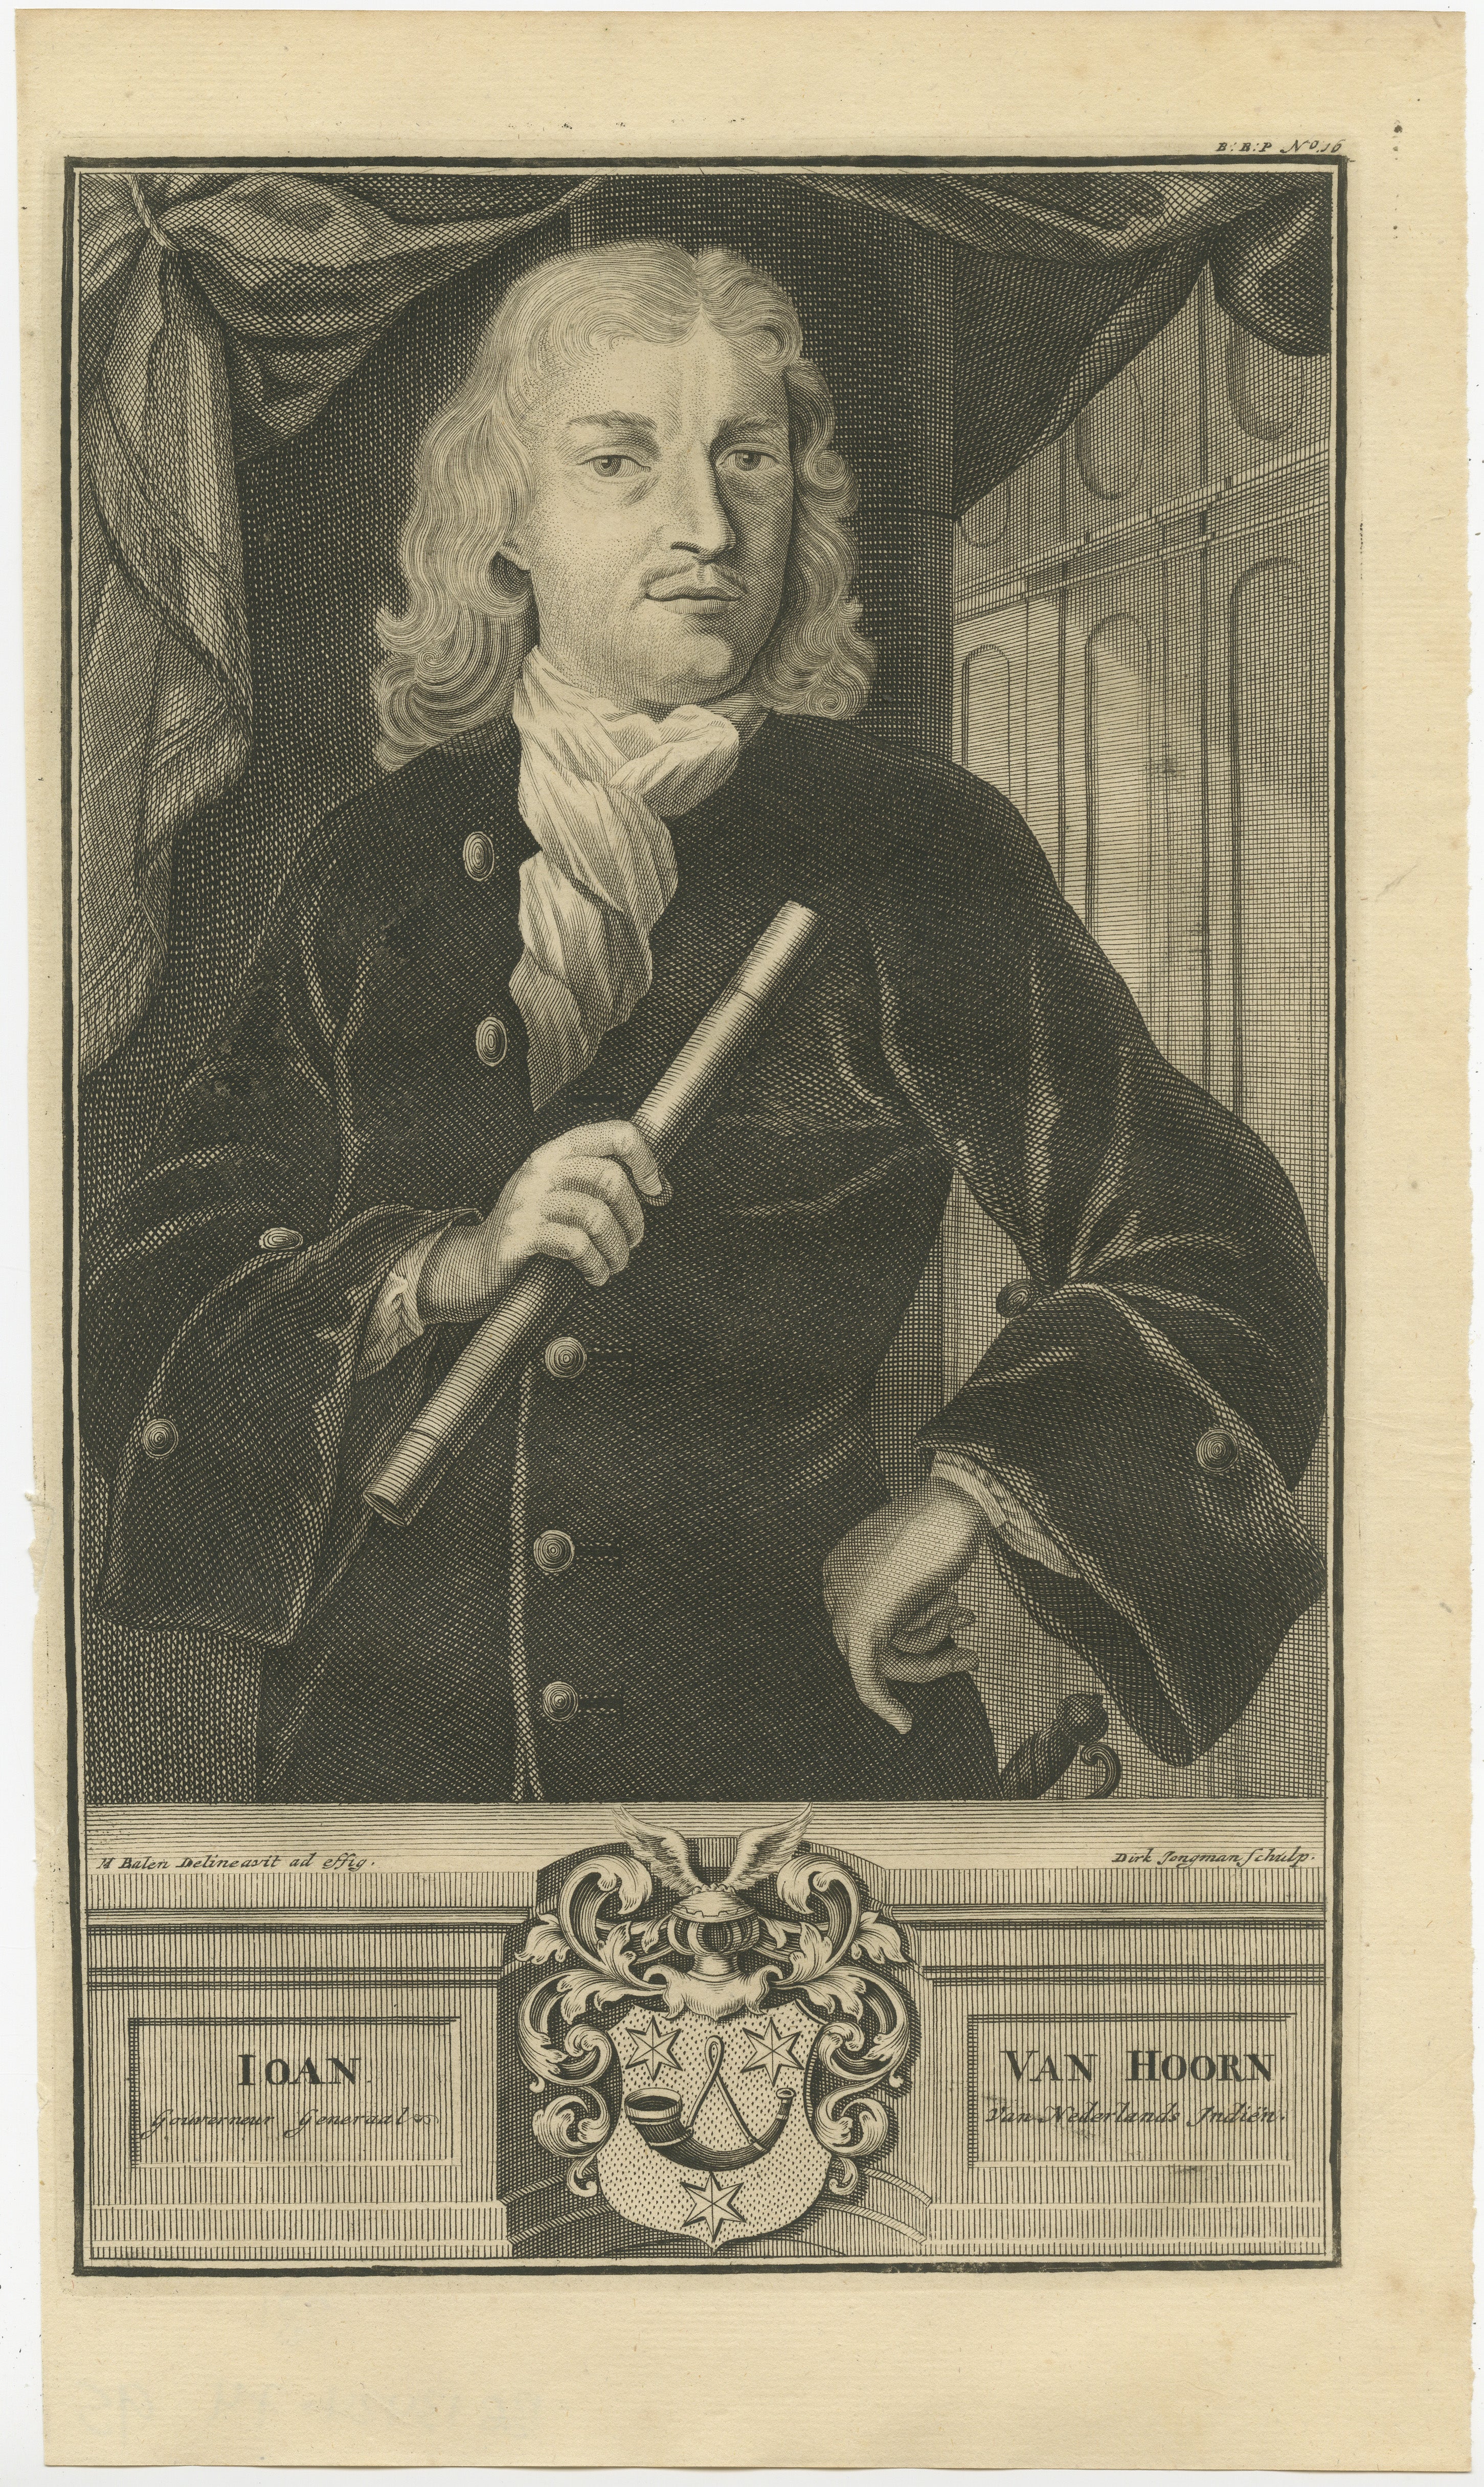 Ioan (or Johan) van Hoorn was governor-general of the Dutch East Indies, and his term was from 1704 to 1709.  

This portrait of Ioan van Hoorn, produced during the early 18th century, captures the likeness of a key figure in the history of the